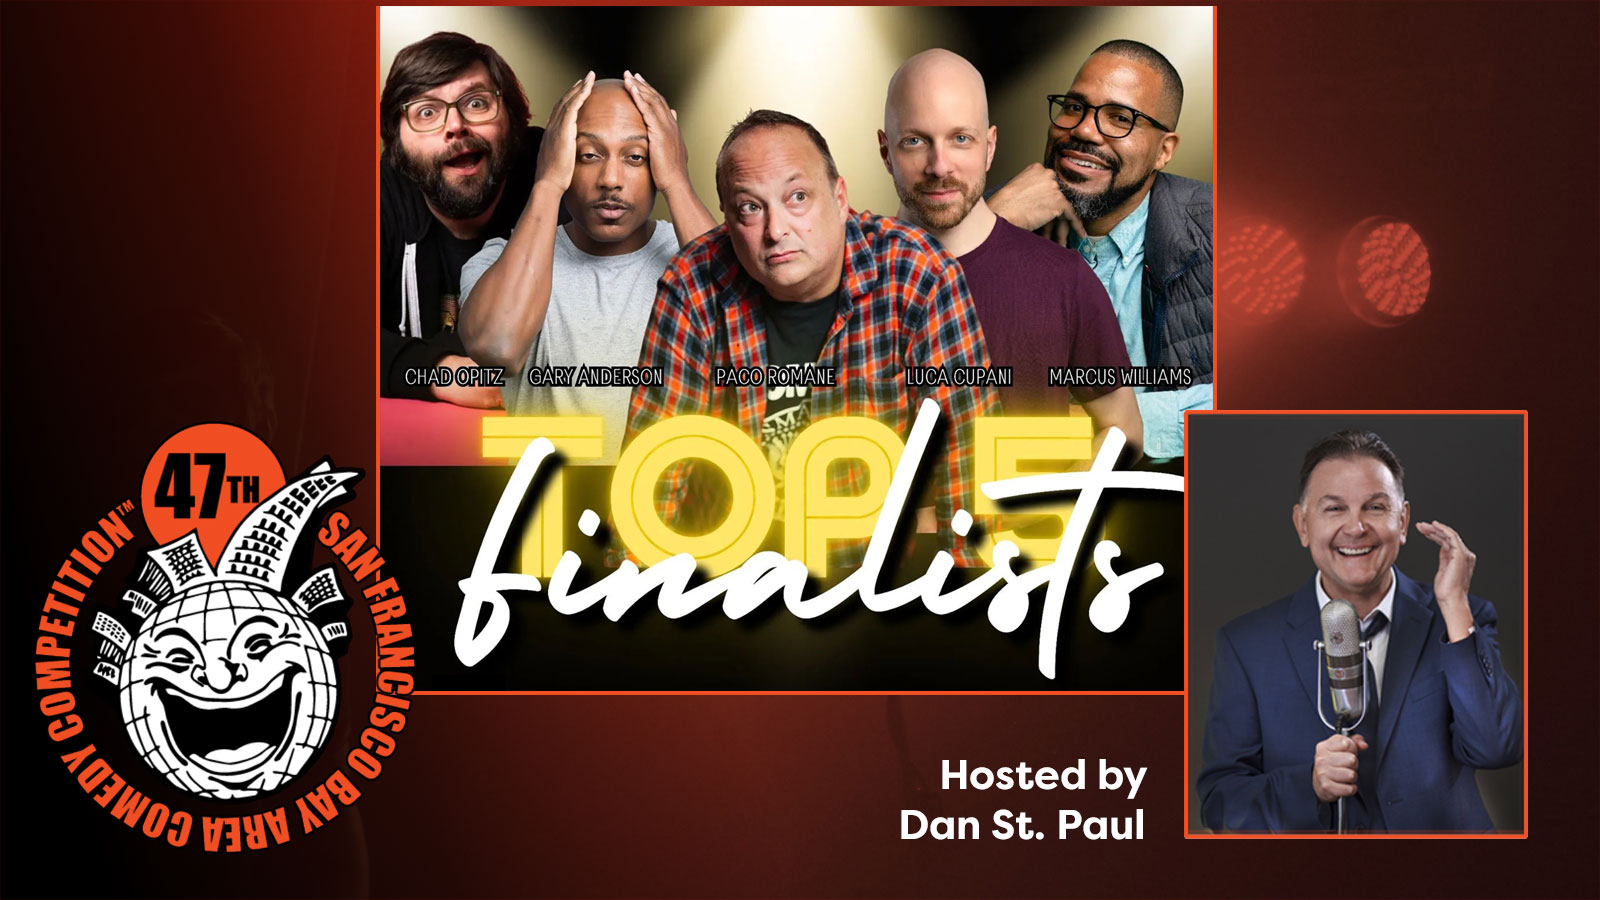 Top 5 Finalists | 47th San Francisco Bay Area Comedy Competition Logo with microphone in background | Hosted by Dan St. Paul